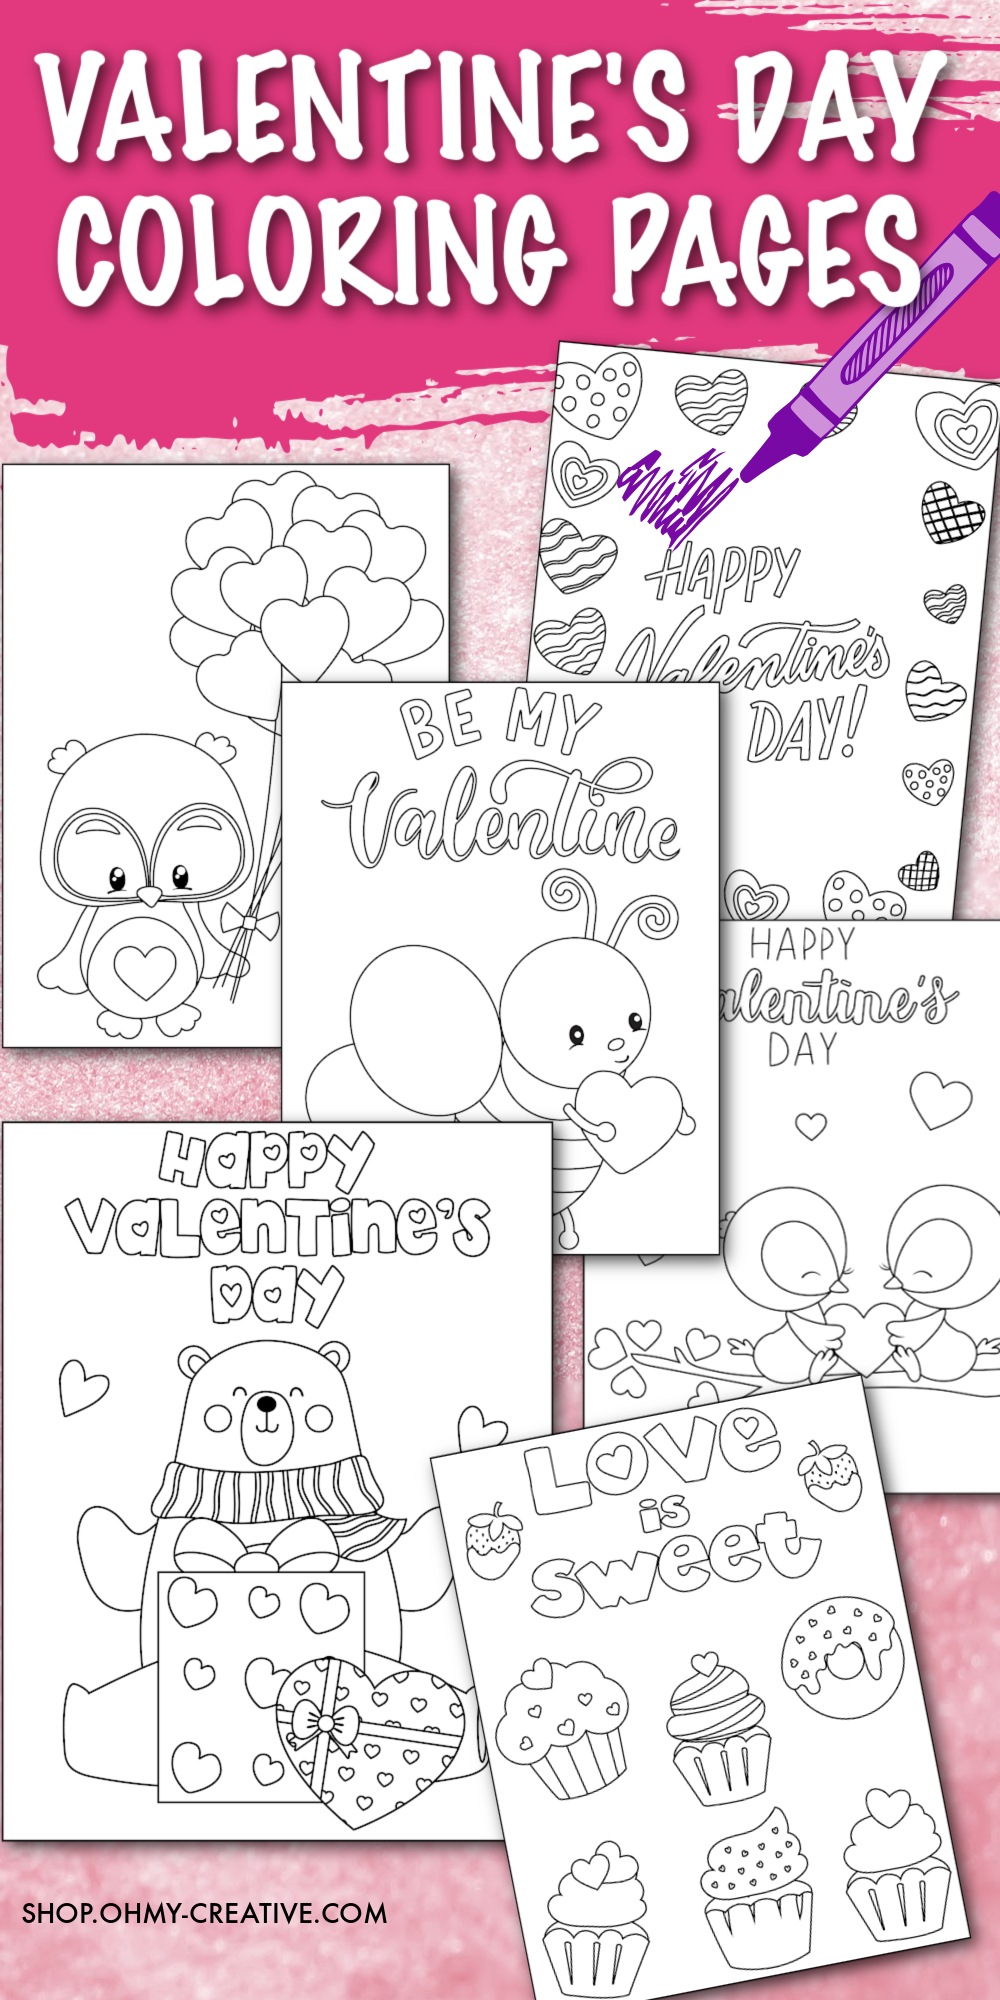 A collage of 6 Valentine's Day coloring sheets for kids.